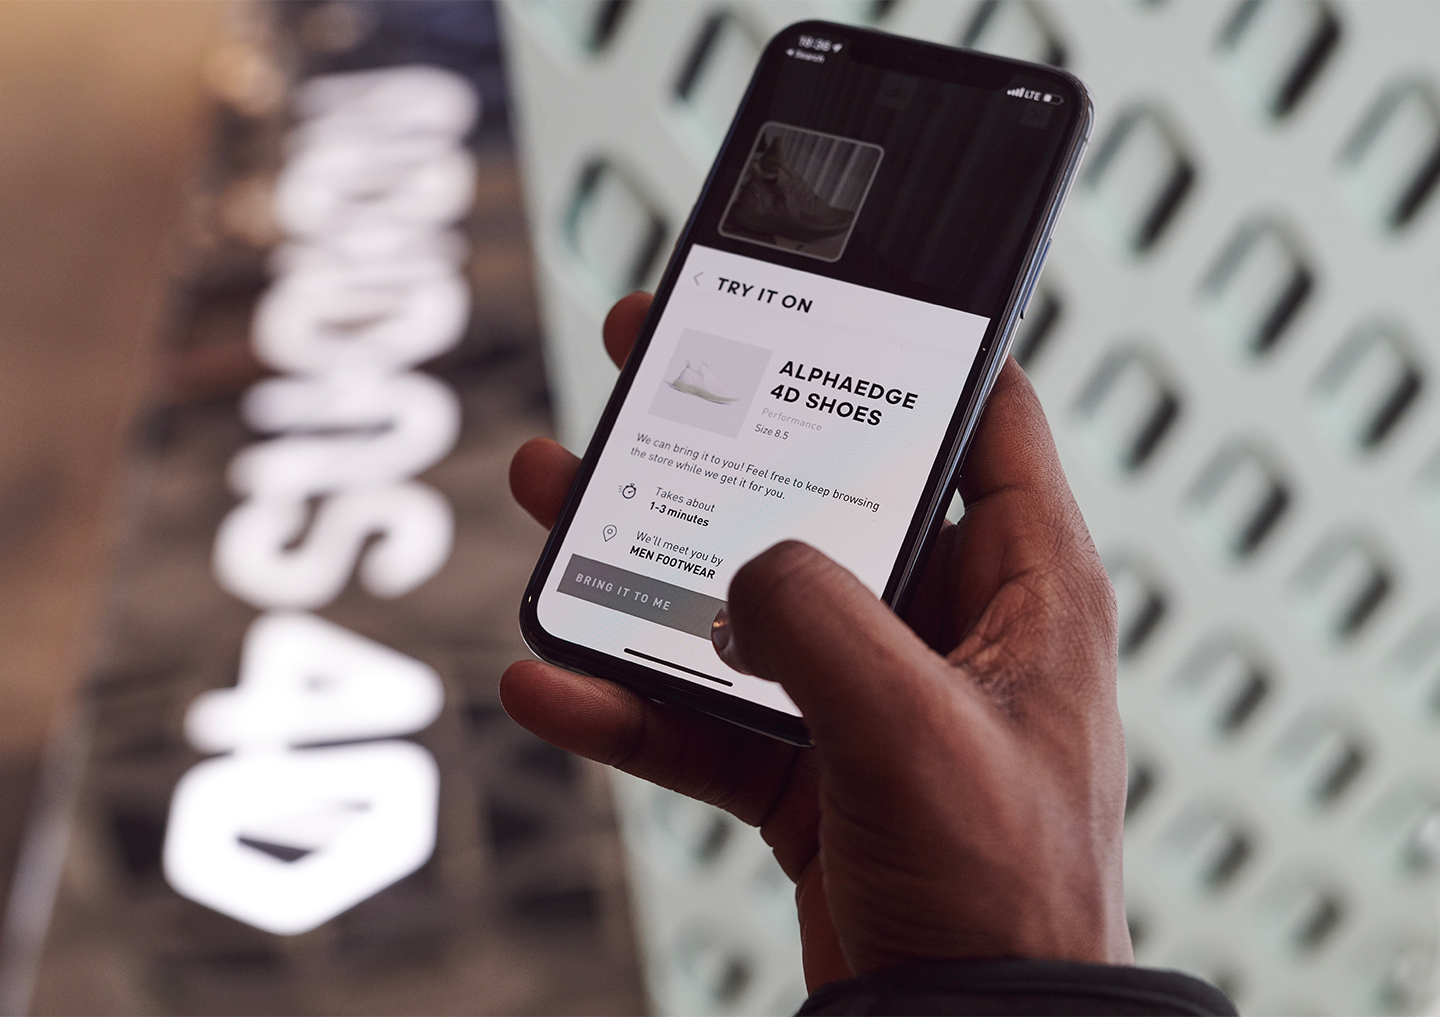 The store design has included embedding bespoke innovations into the Adidas app, including a ‘Bring It to Me’ feature which uses in-store geolocation tracking to provide an uninterrupted browsing experience © Adidas